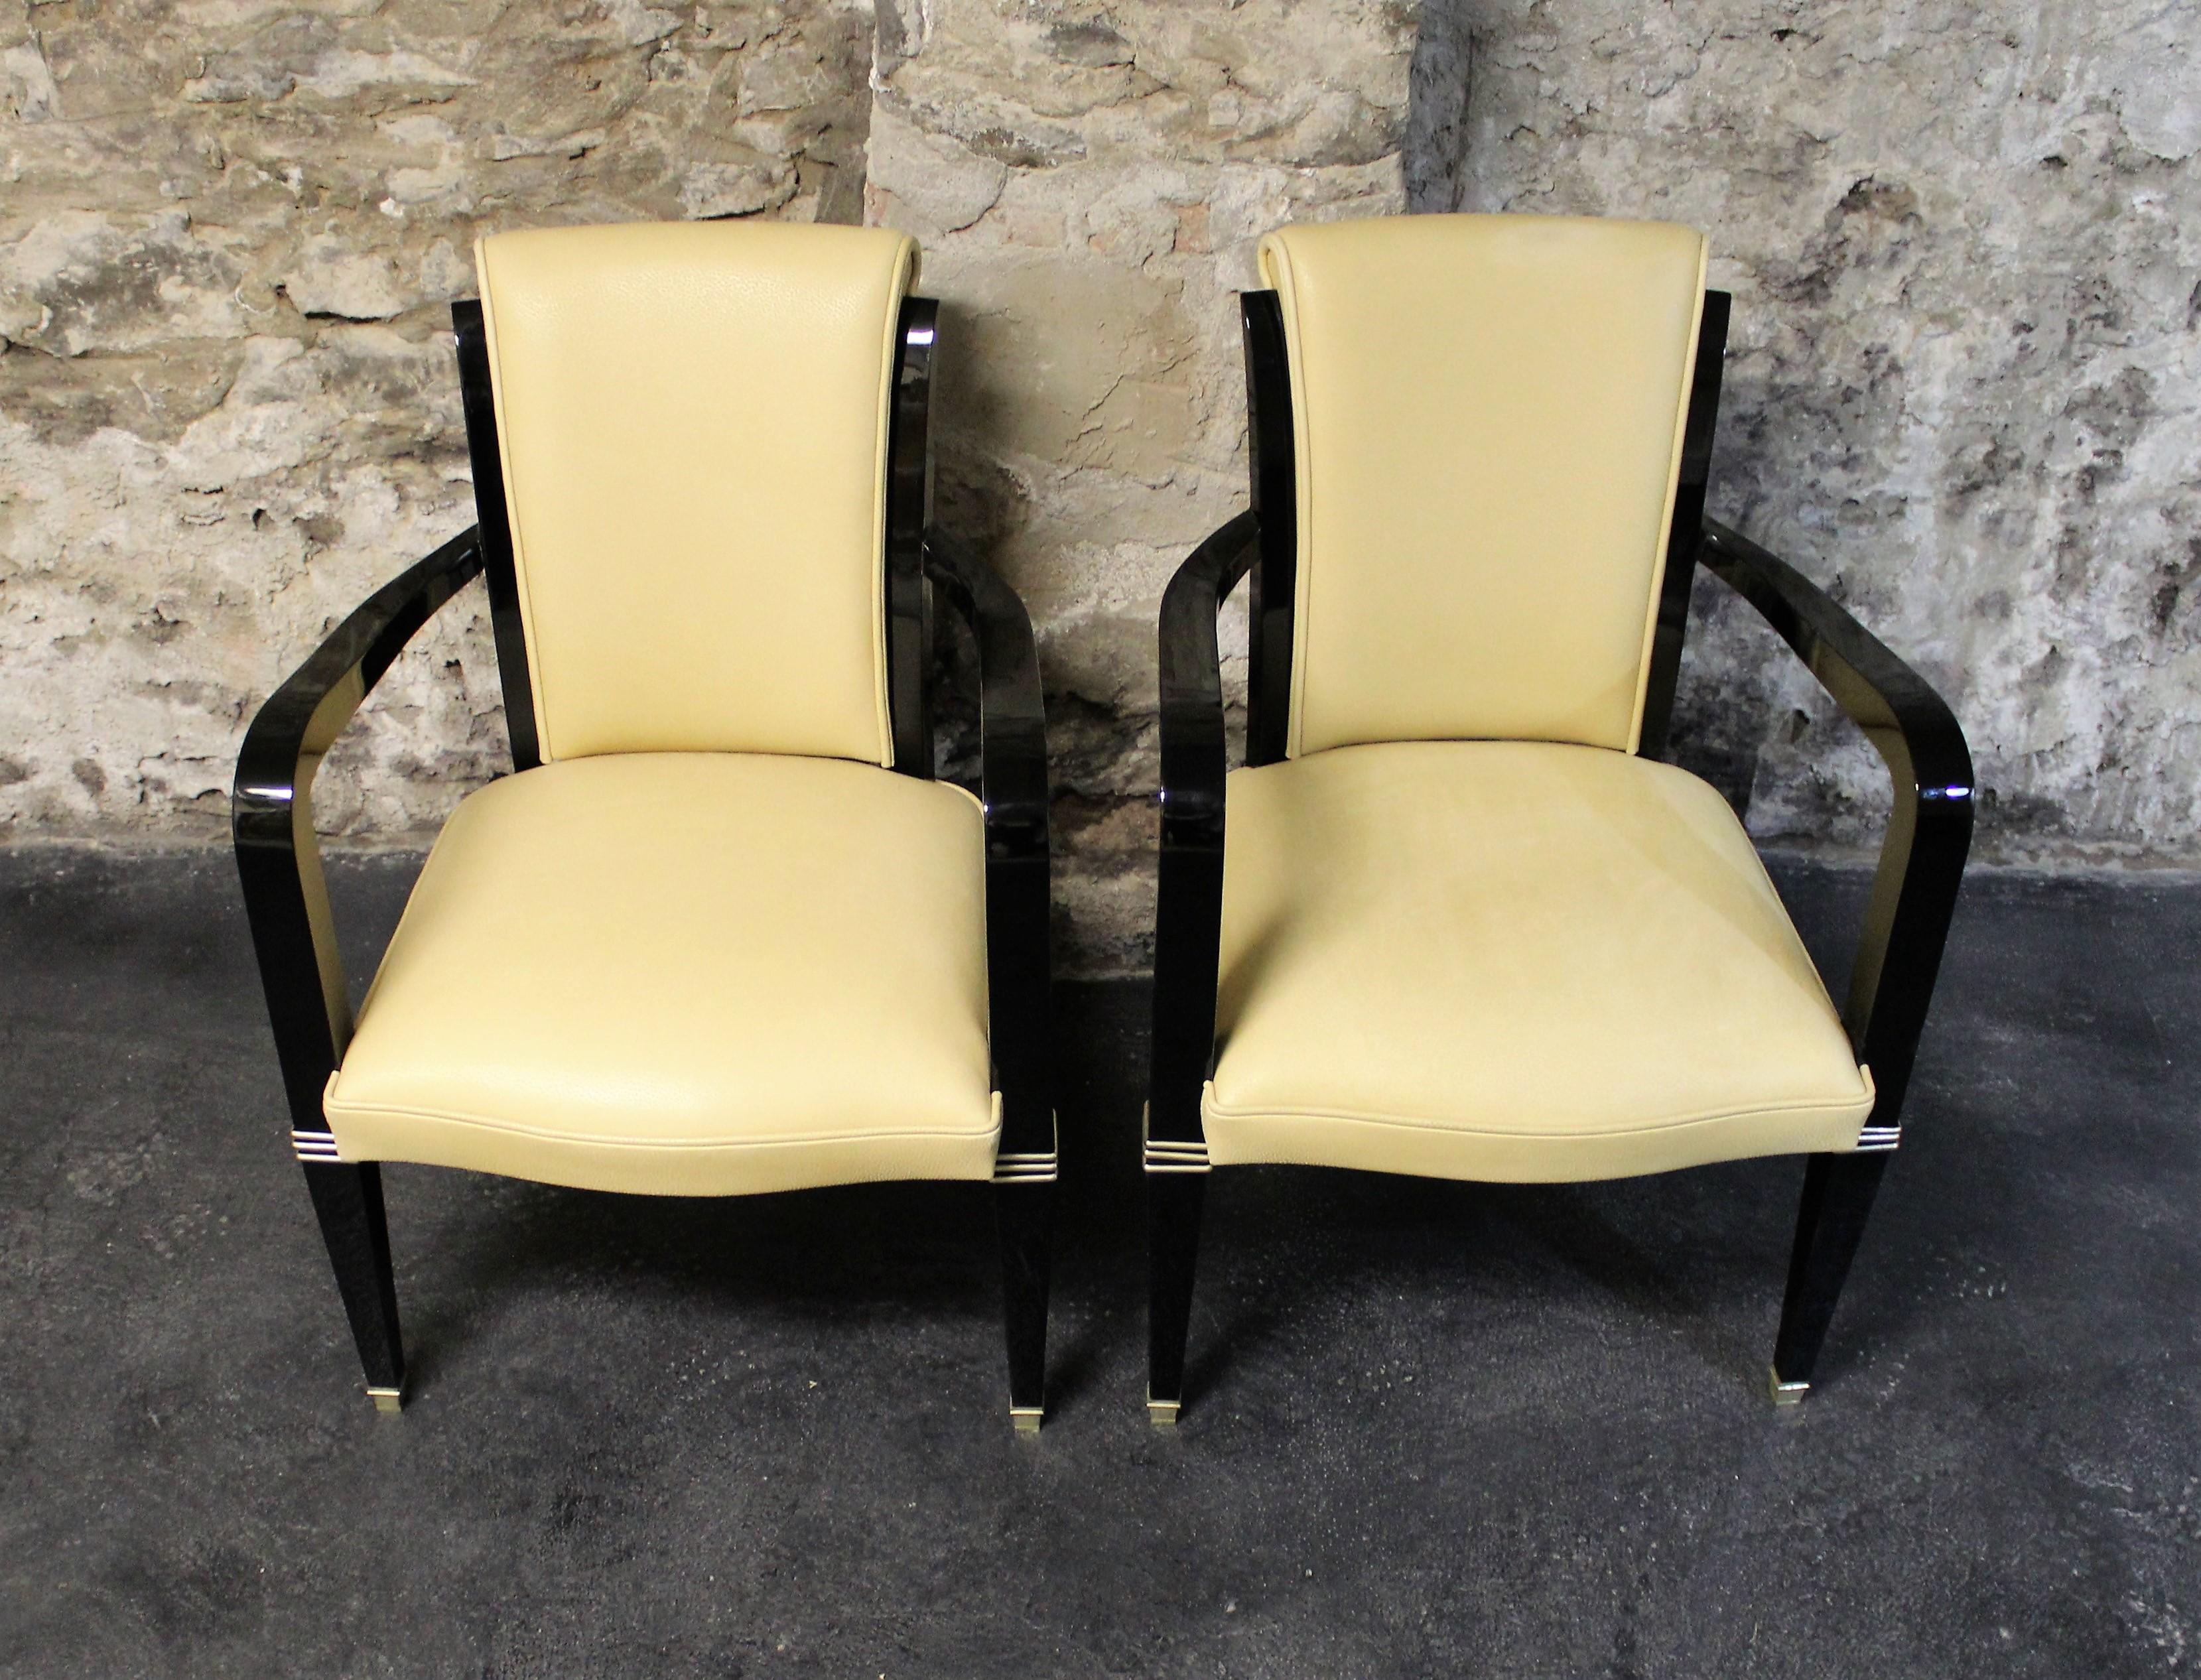 20th Century Pair of Art Deco Leather and Polished Ebonized Frame Armchairs